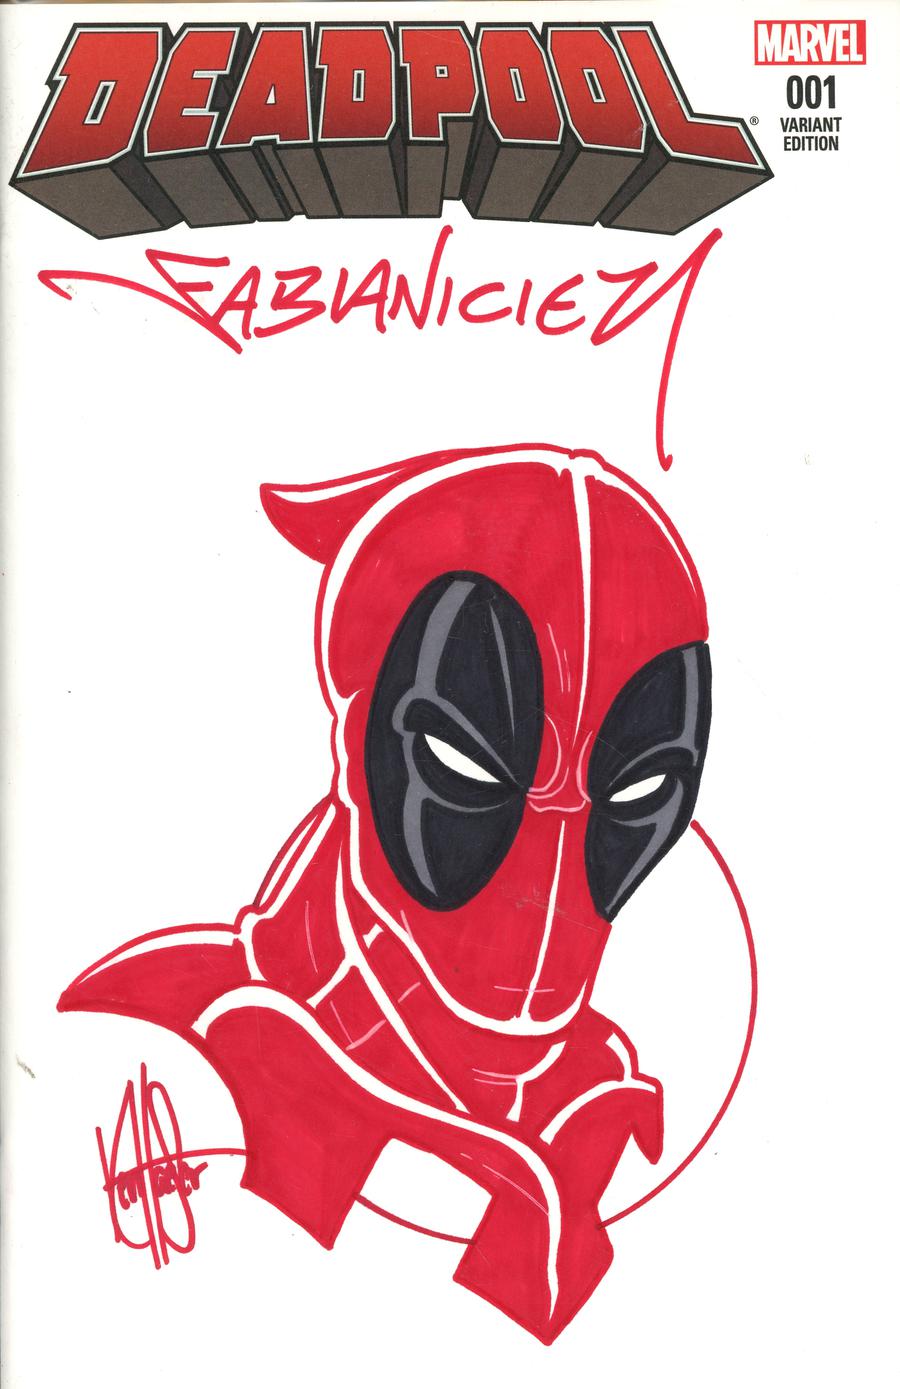 Deadpool Vol 5 #1 Cover N DF Signed By Fabian Nicieza & Remarked With A Deadpool Hand-Drawn Sketch By Ken Haeser